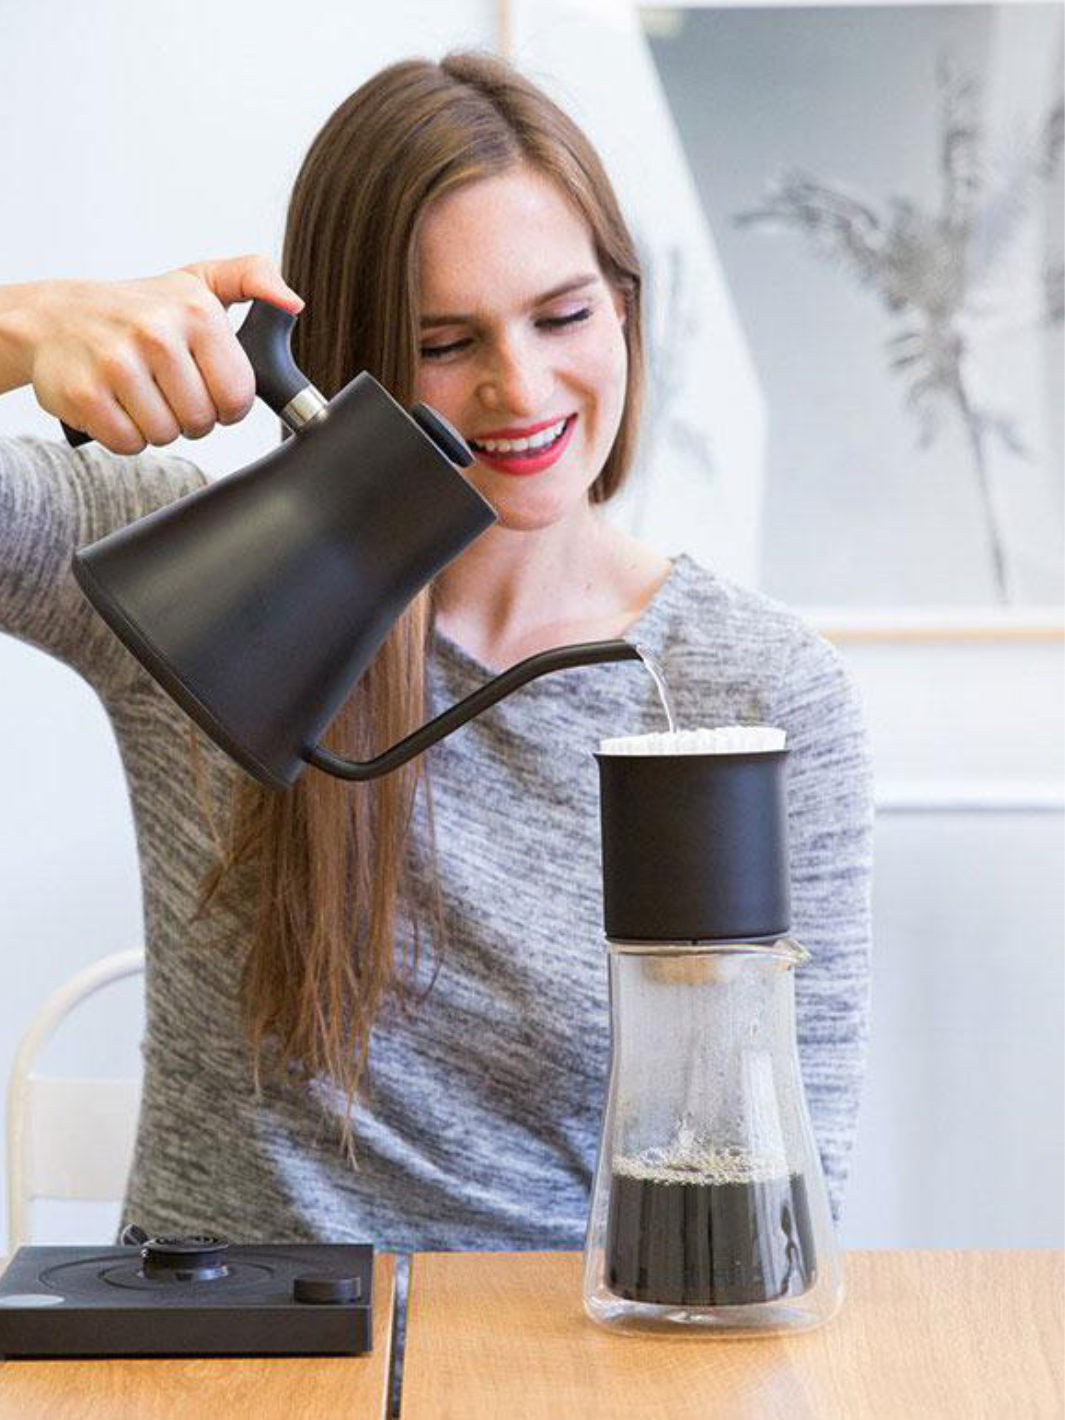 Fellow Stagg [X] Pour-Over Coffee Dripper, Double Wall Vacuum Insulated Stainless Steel